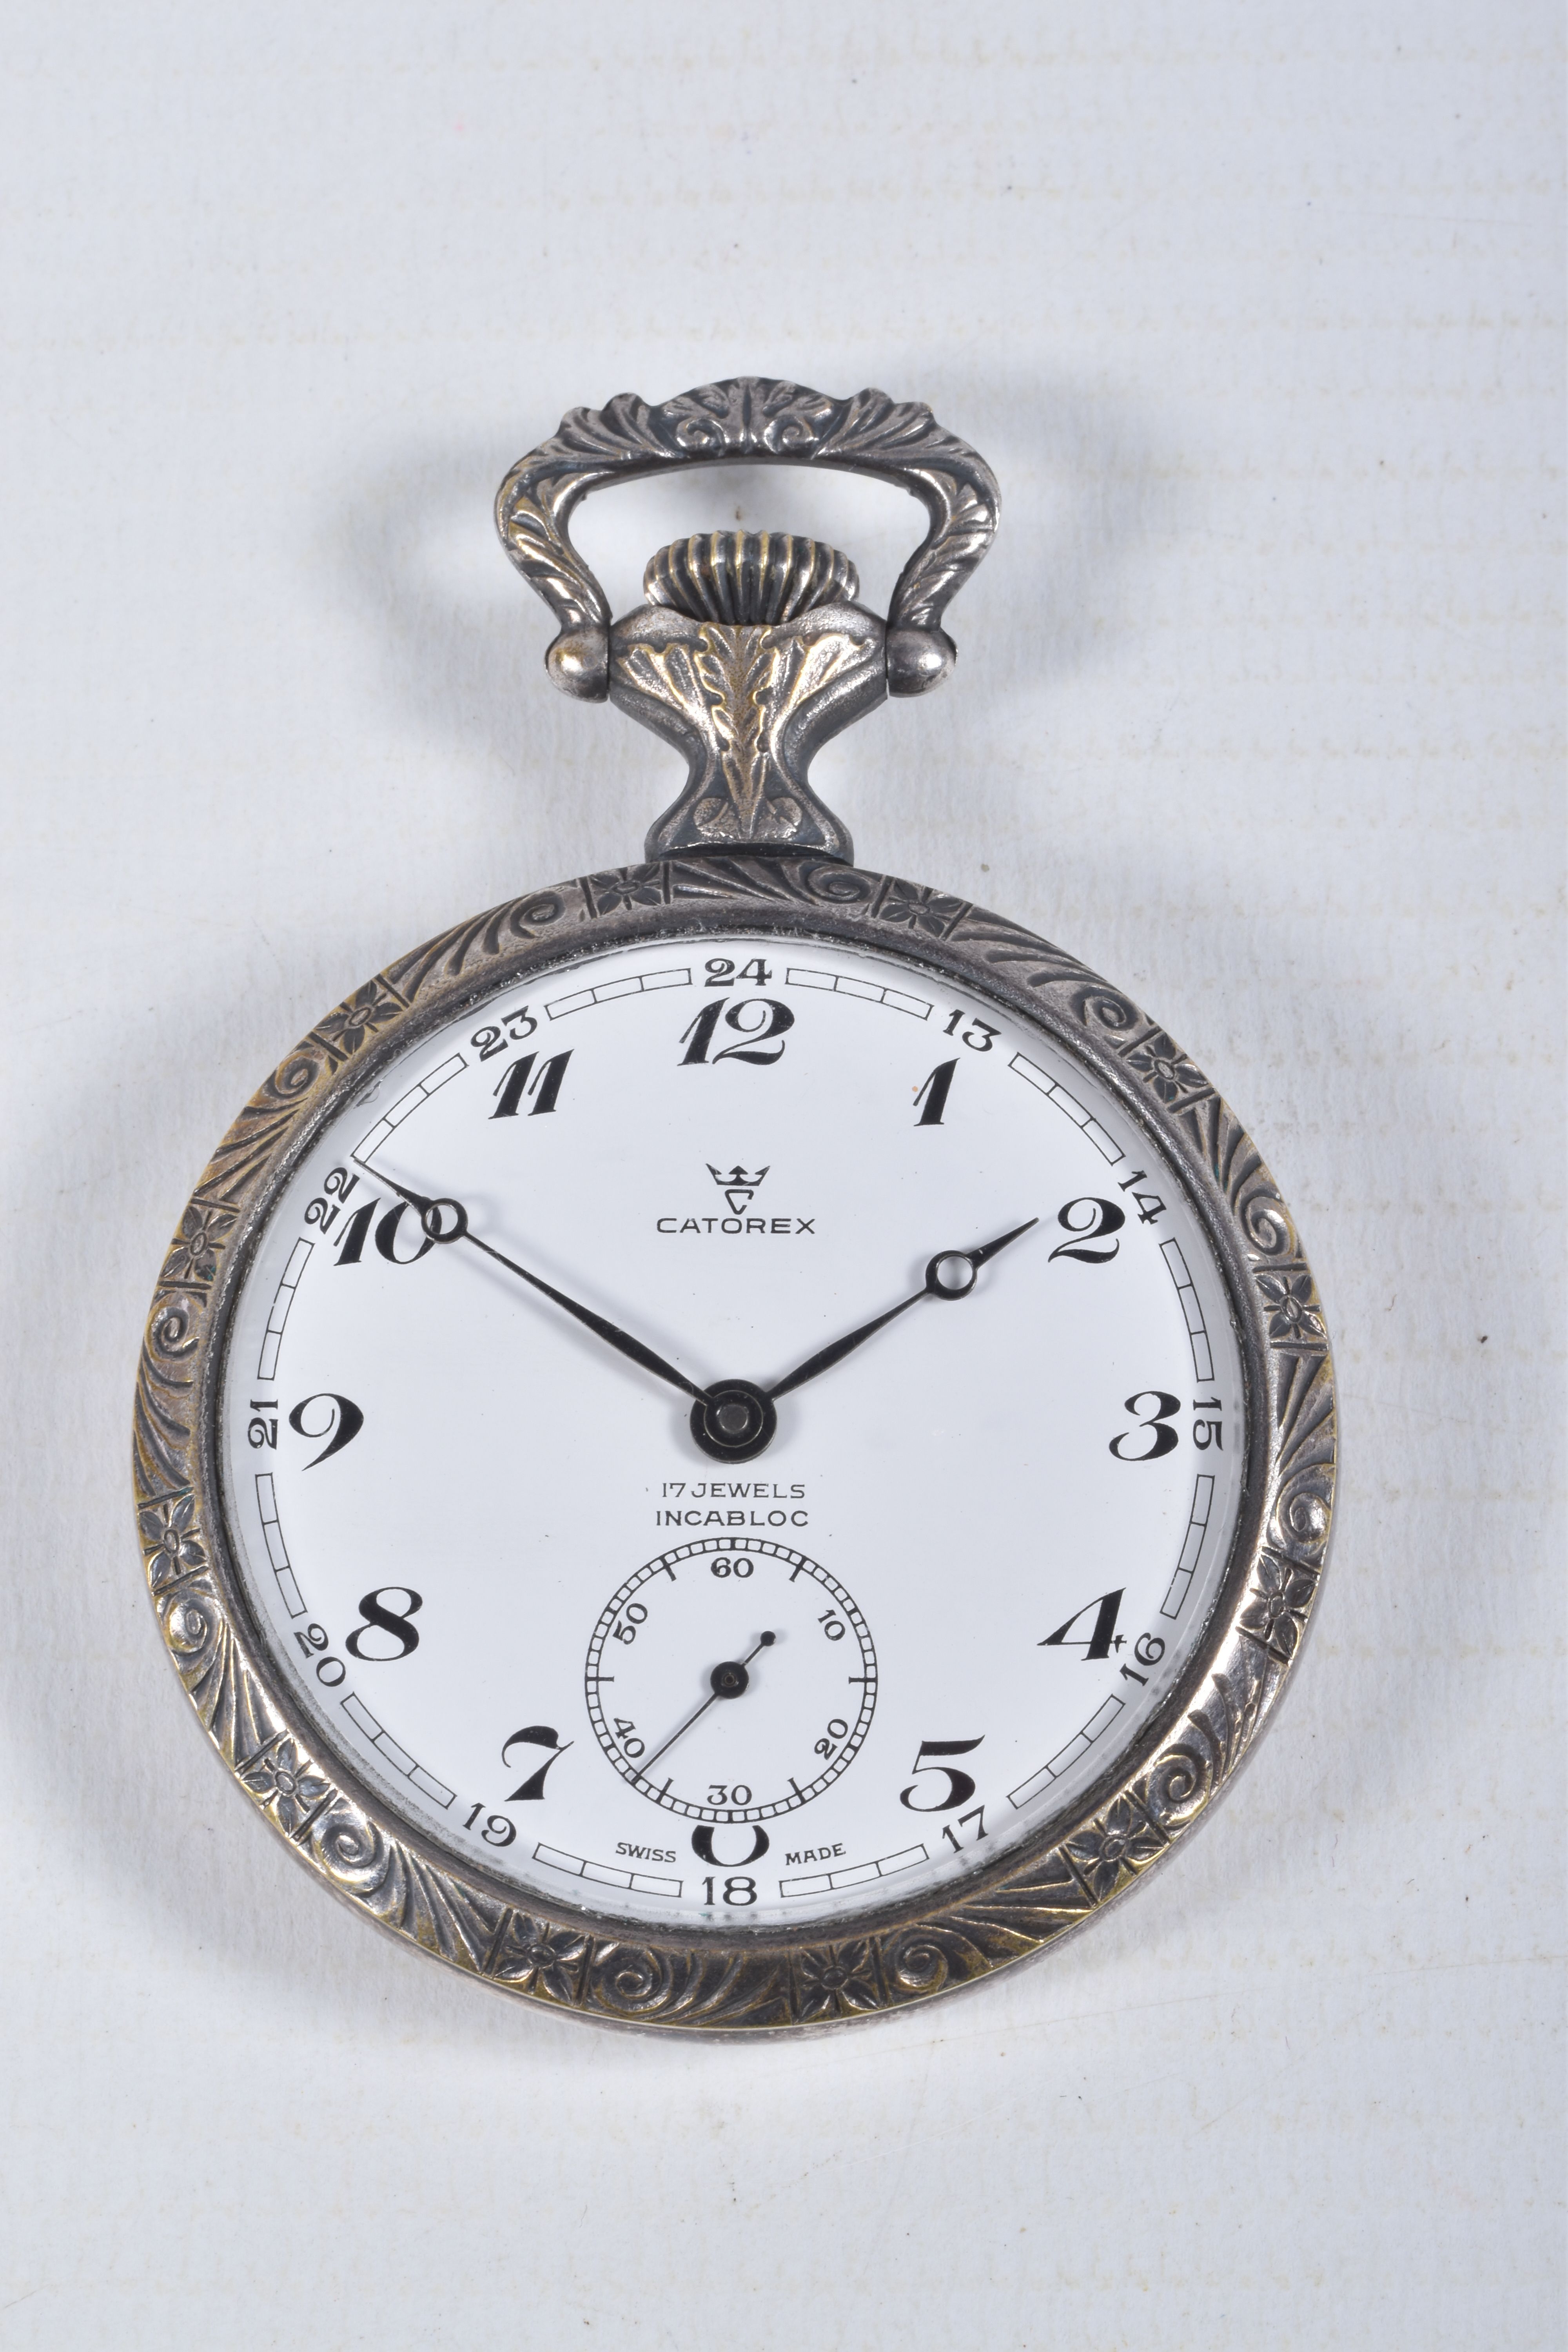 A WHITE METAL 'CATOREX' OPEN FACE POCKET WATCH, manual wind, round white dial signed 'Catorex',